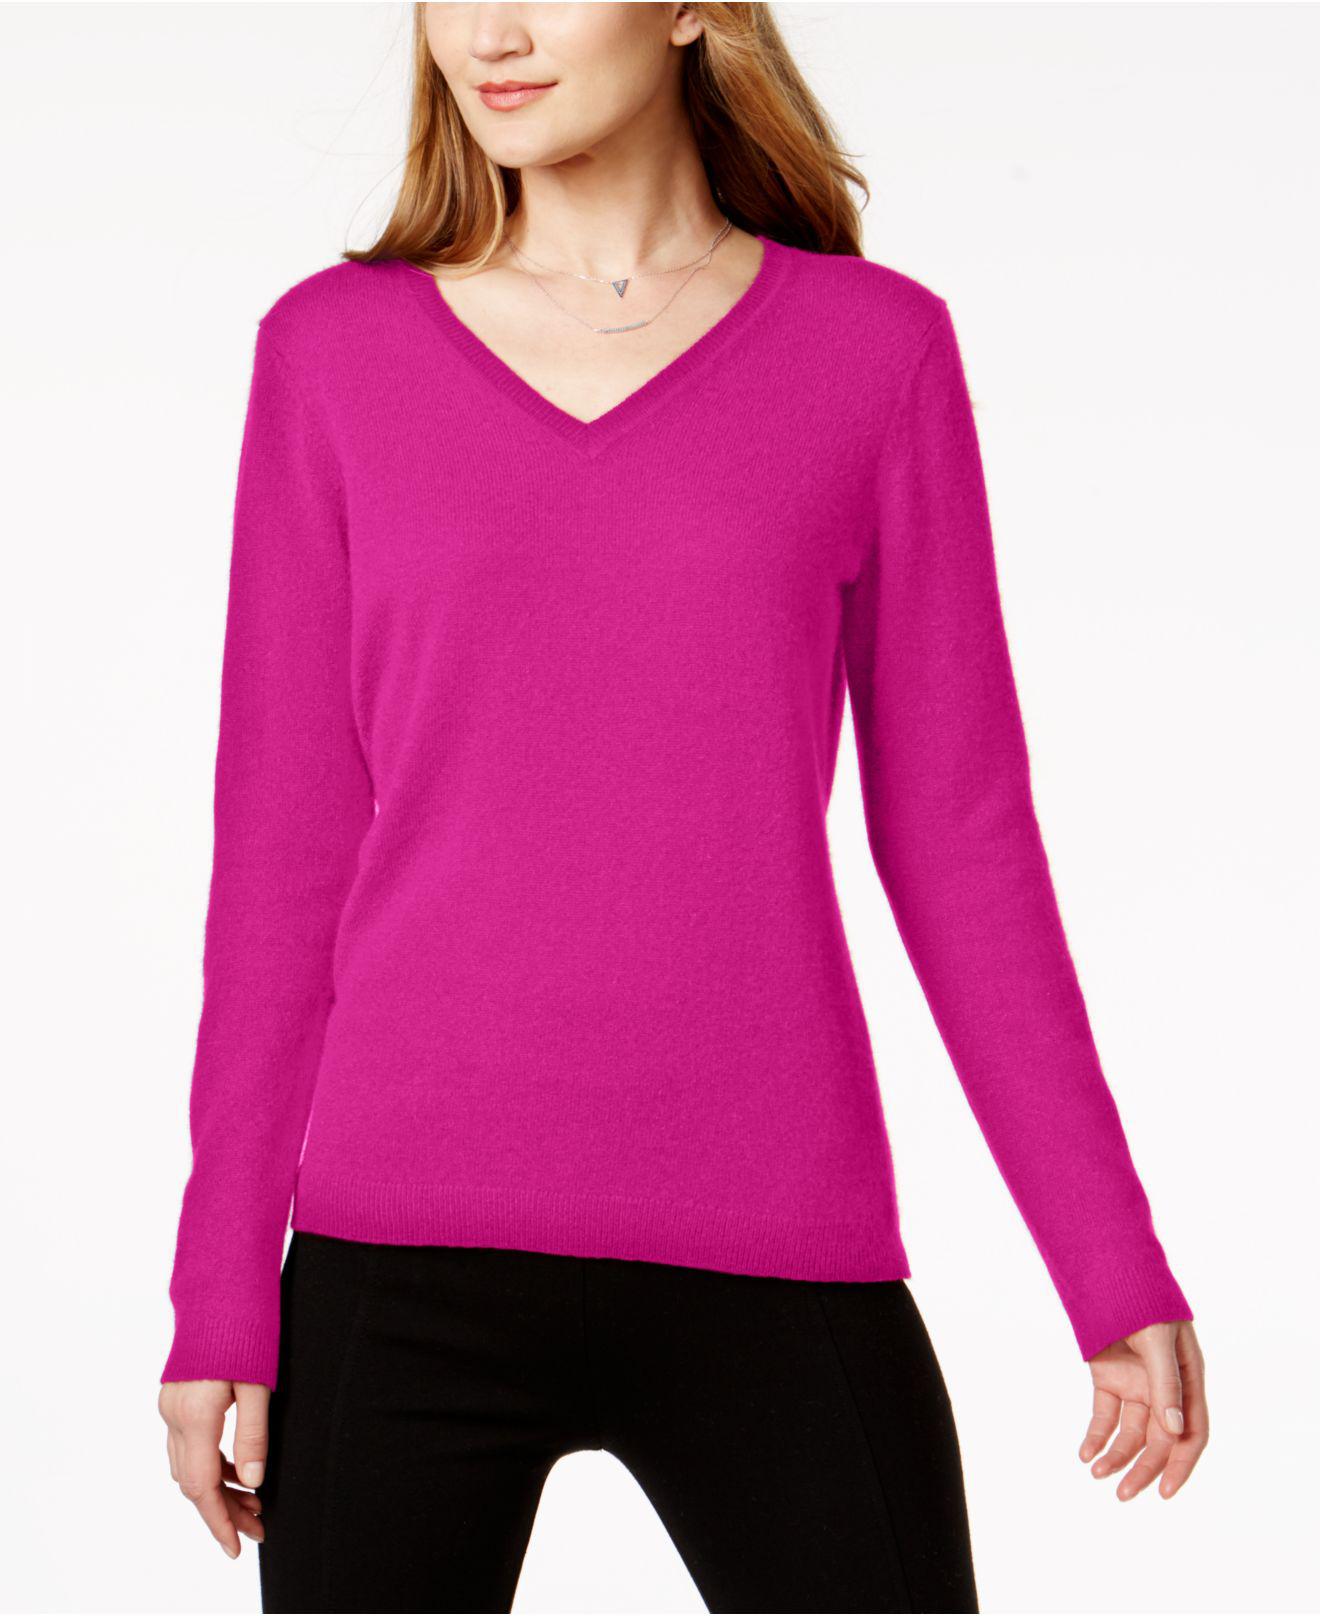 Charter Club Cashmere Sweater in Pink - Lyst